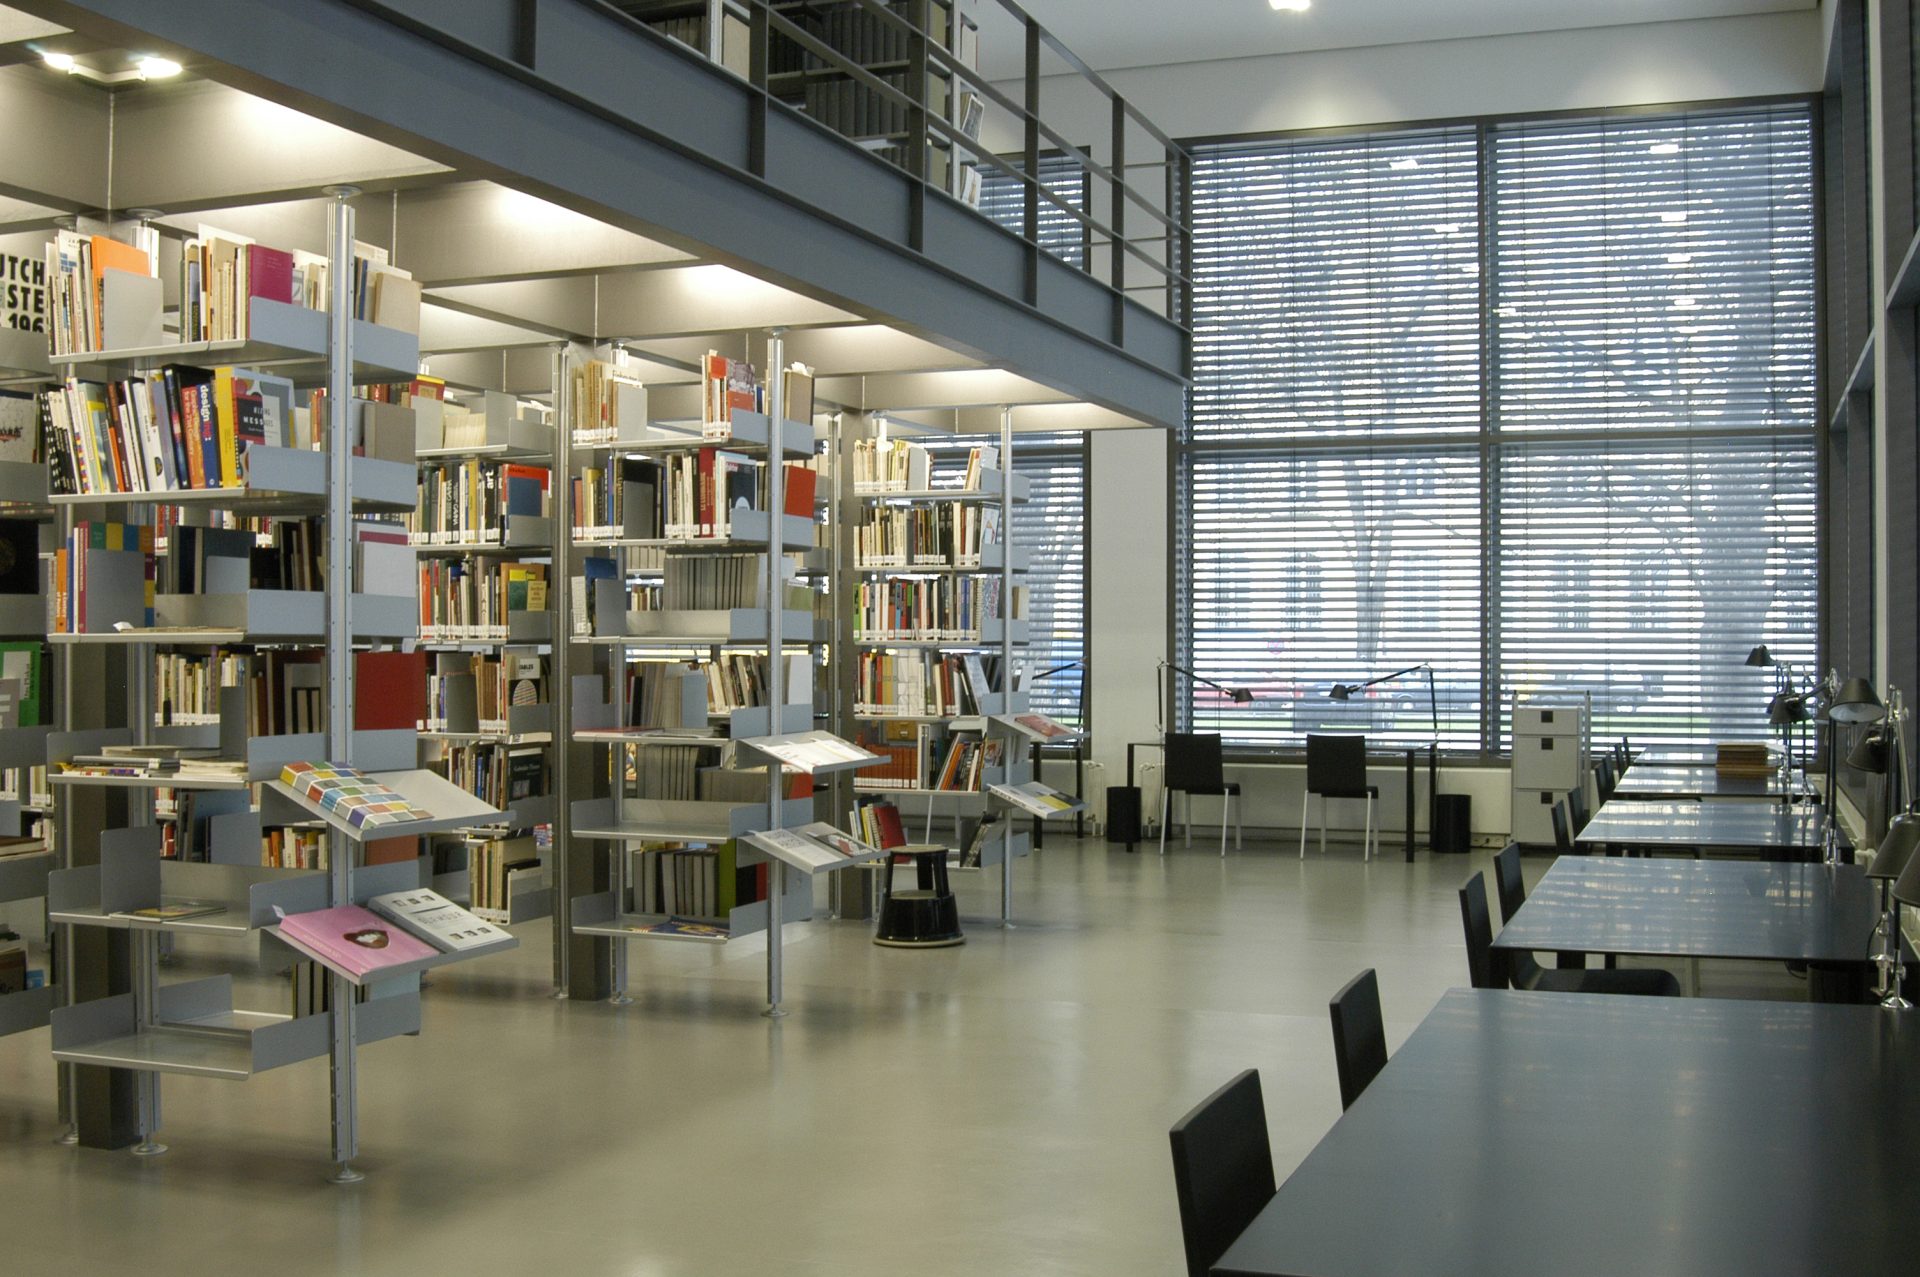 The picture shows the library with high ceilings, glass windows and blinds. On the left are filled bookshelves.